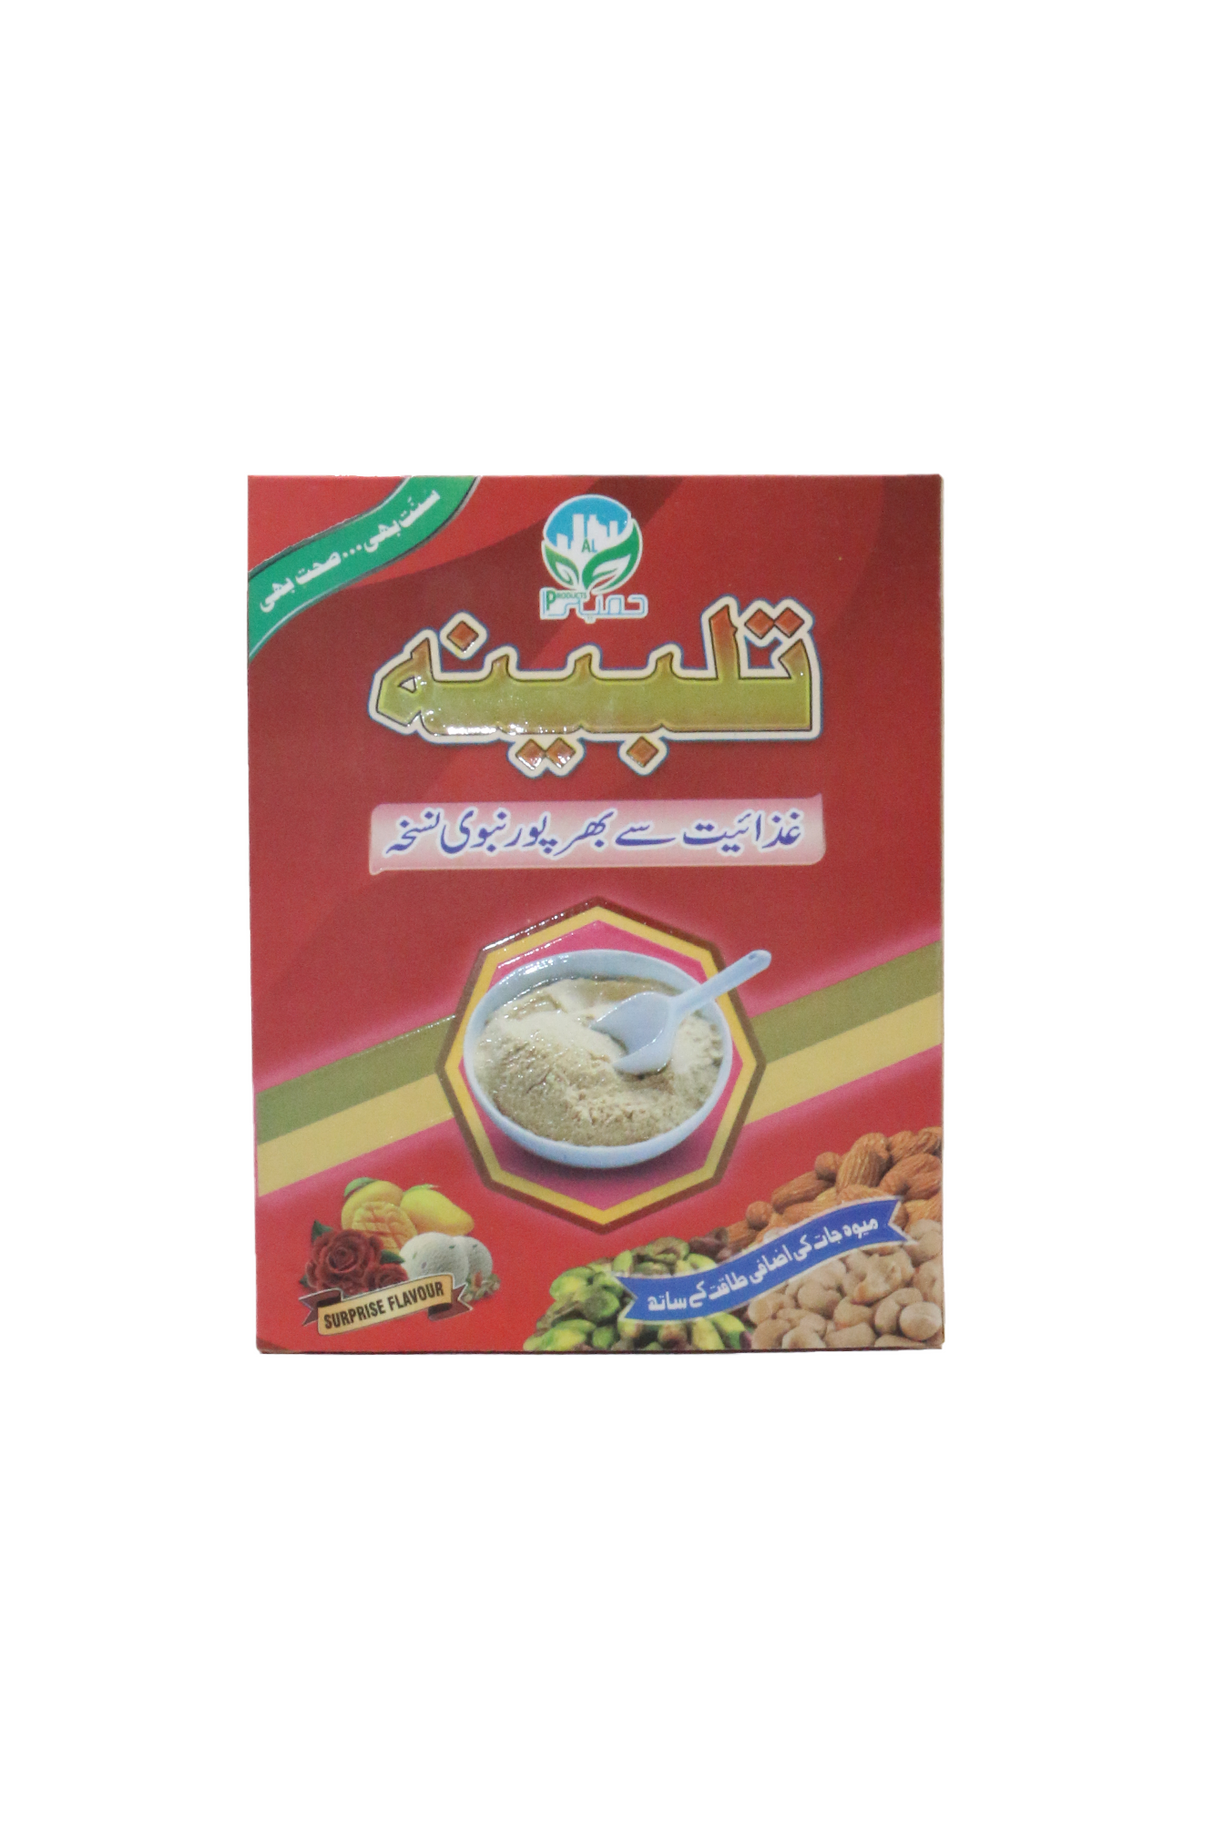 talbina cereal surprise flavour 200g